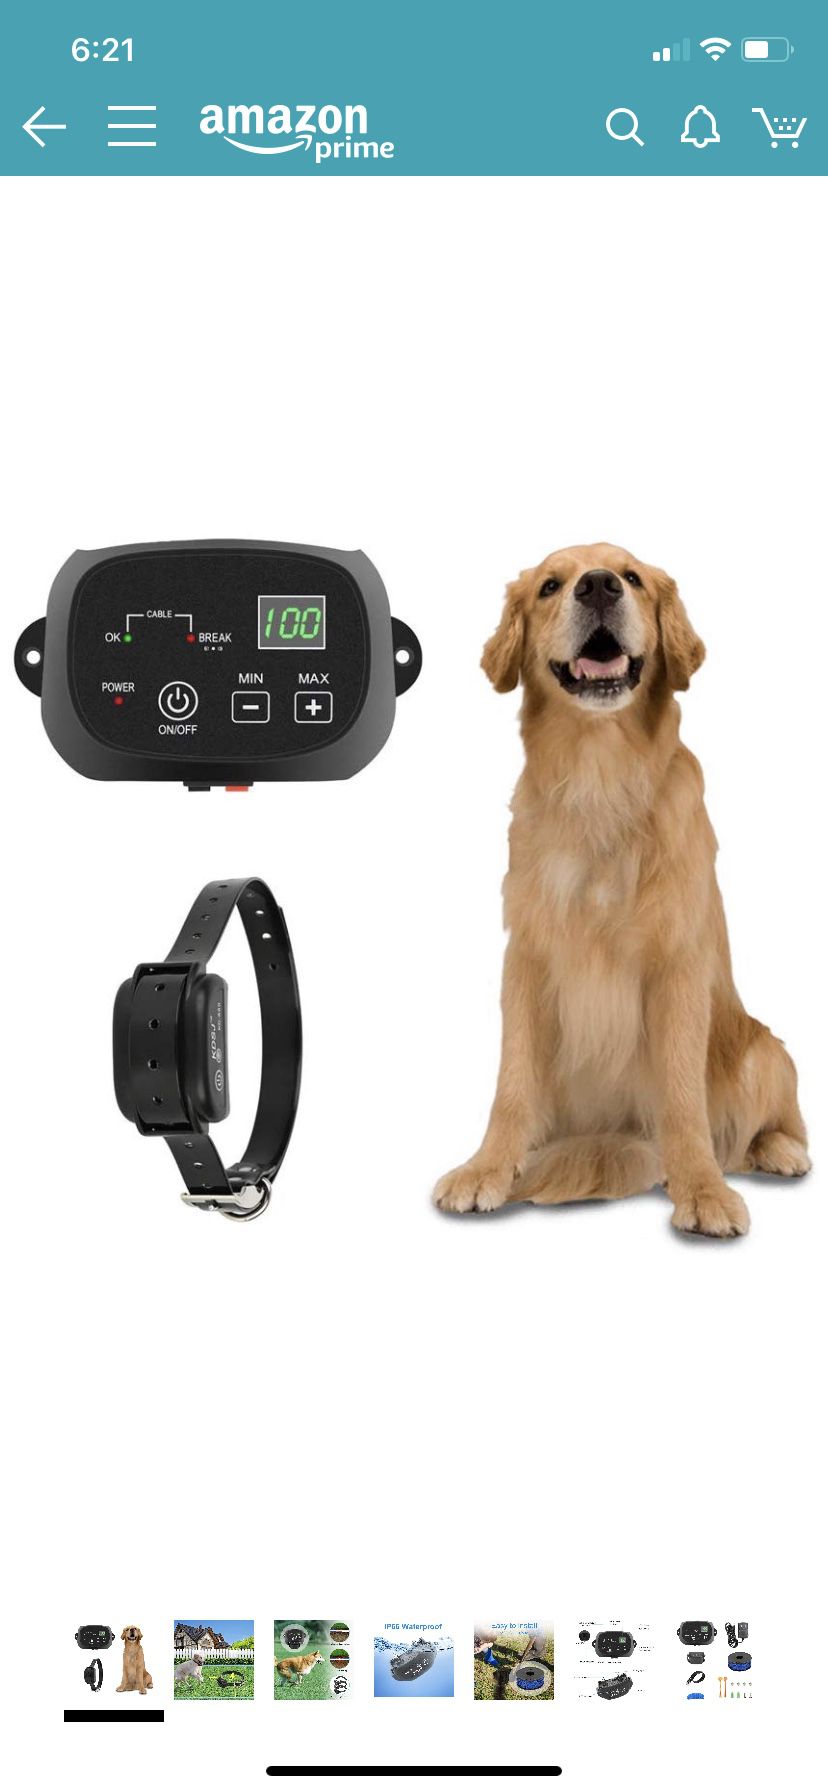 NEW! Electric Dog Fence Containment System for 1 Dog. Paid $95.99 on Amazon. Receipt in pics.